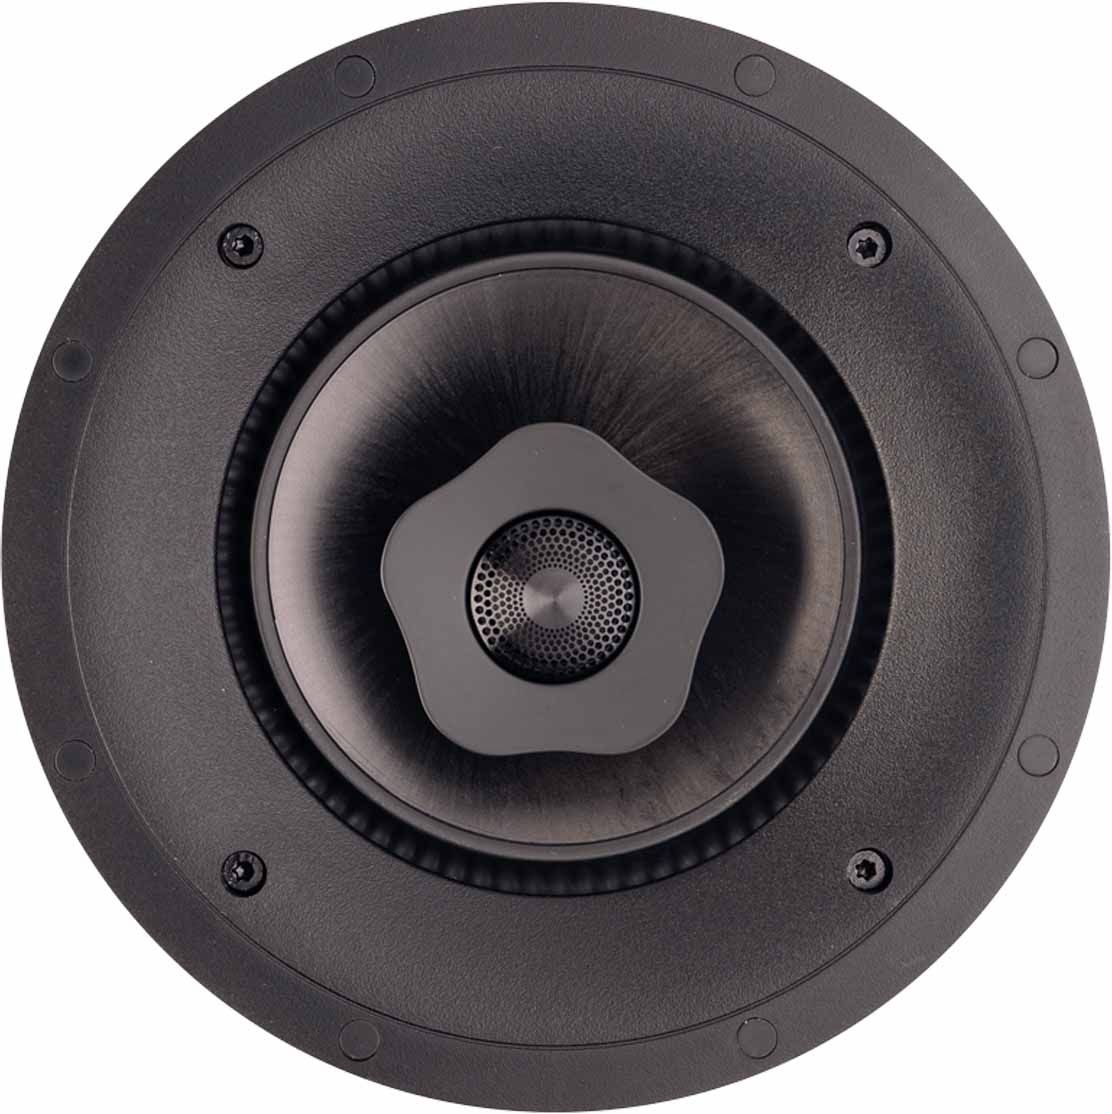 Paradigm CI Pro P65-R v2 In-Ceiling Speaker - Each - front view without grille